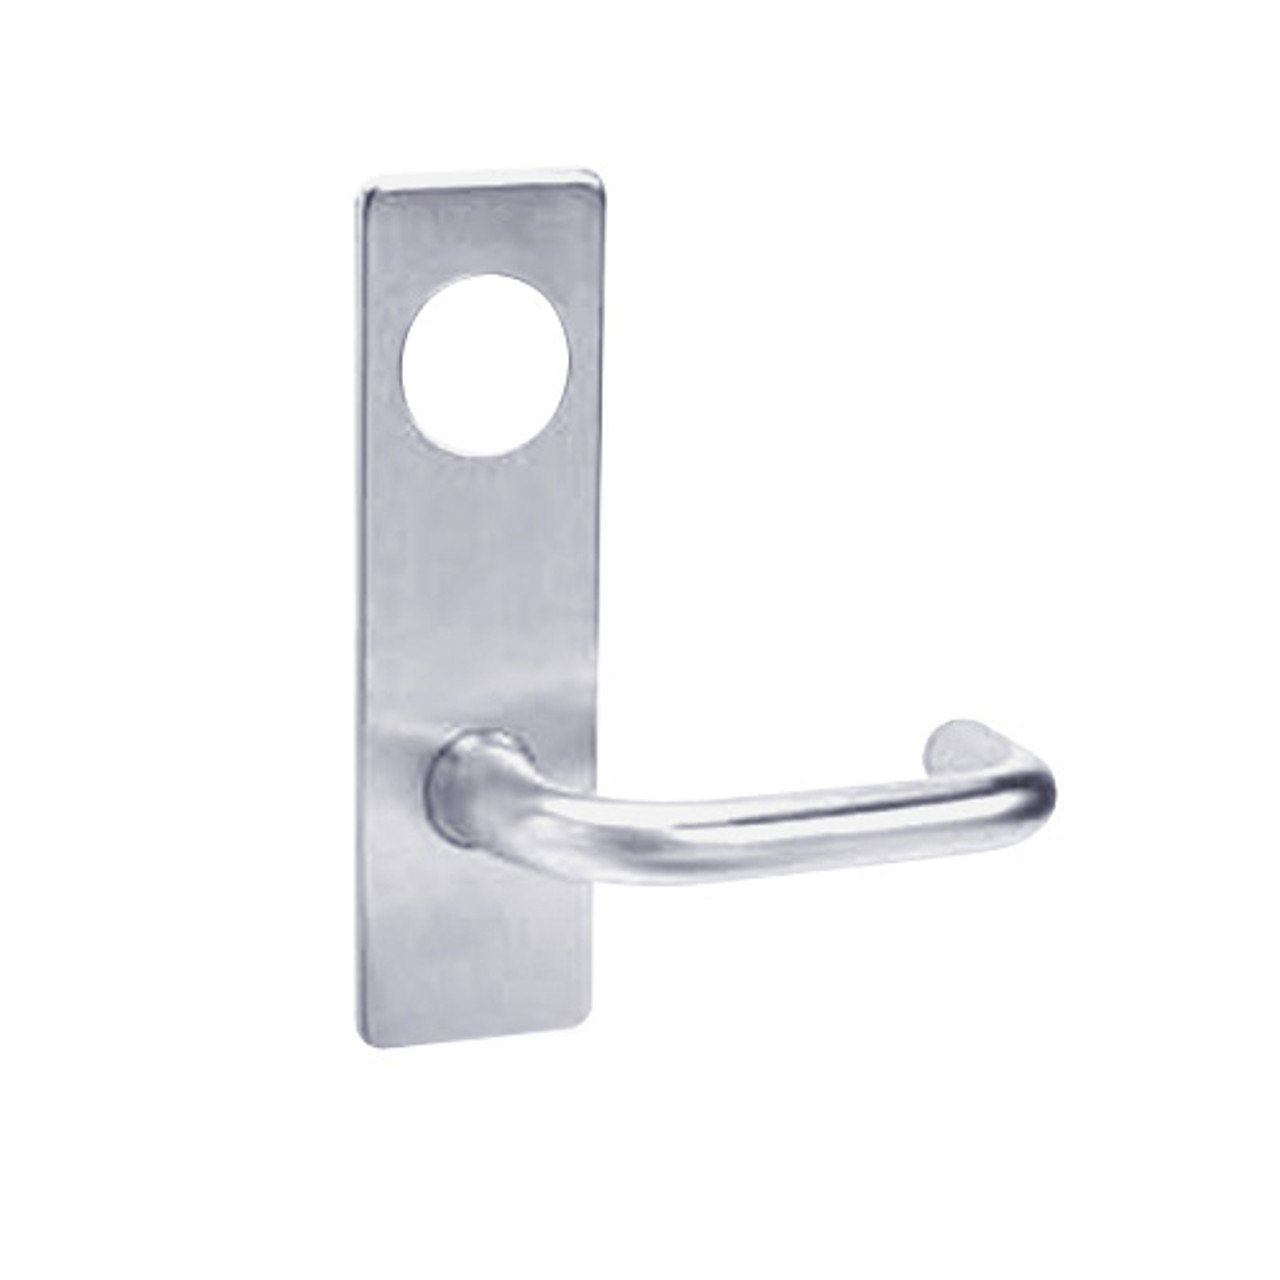 ML2058-LWM-626-CL7 Corbin Russwin ML2000 Series IC 7-Pin Less Core Mortise Entrance Holdback Locksets with Lustra Lever in Satin Chrome